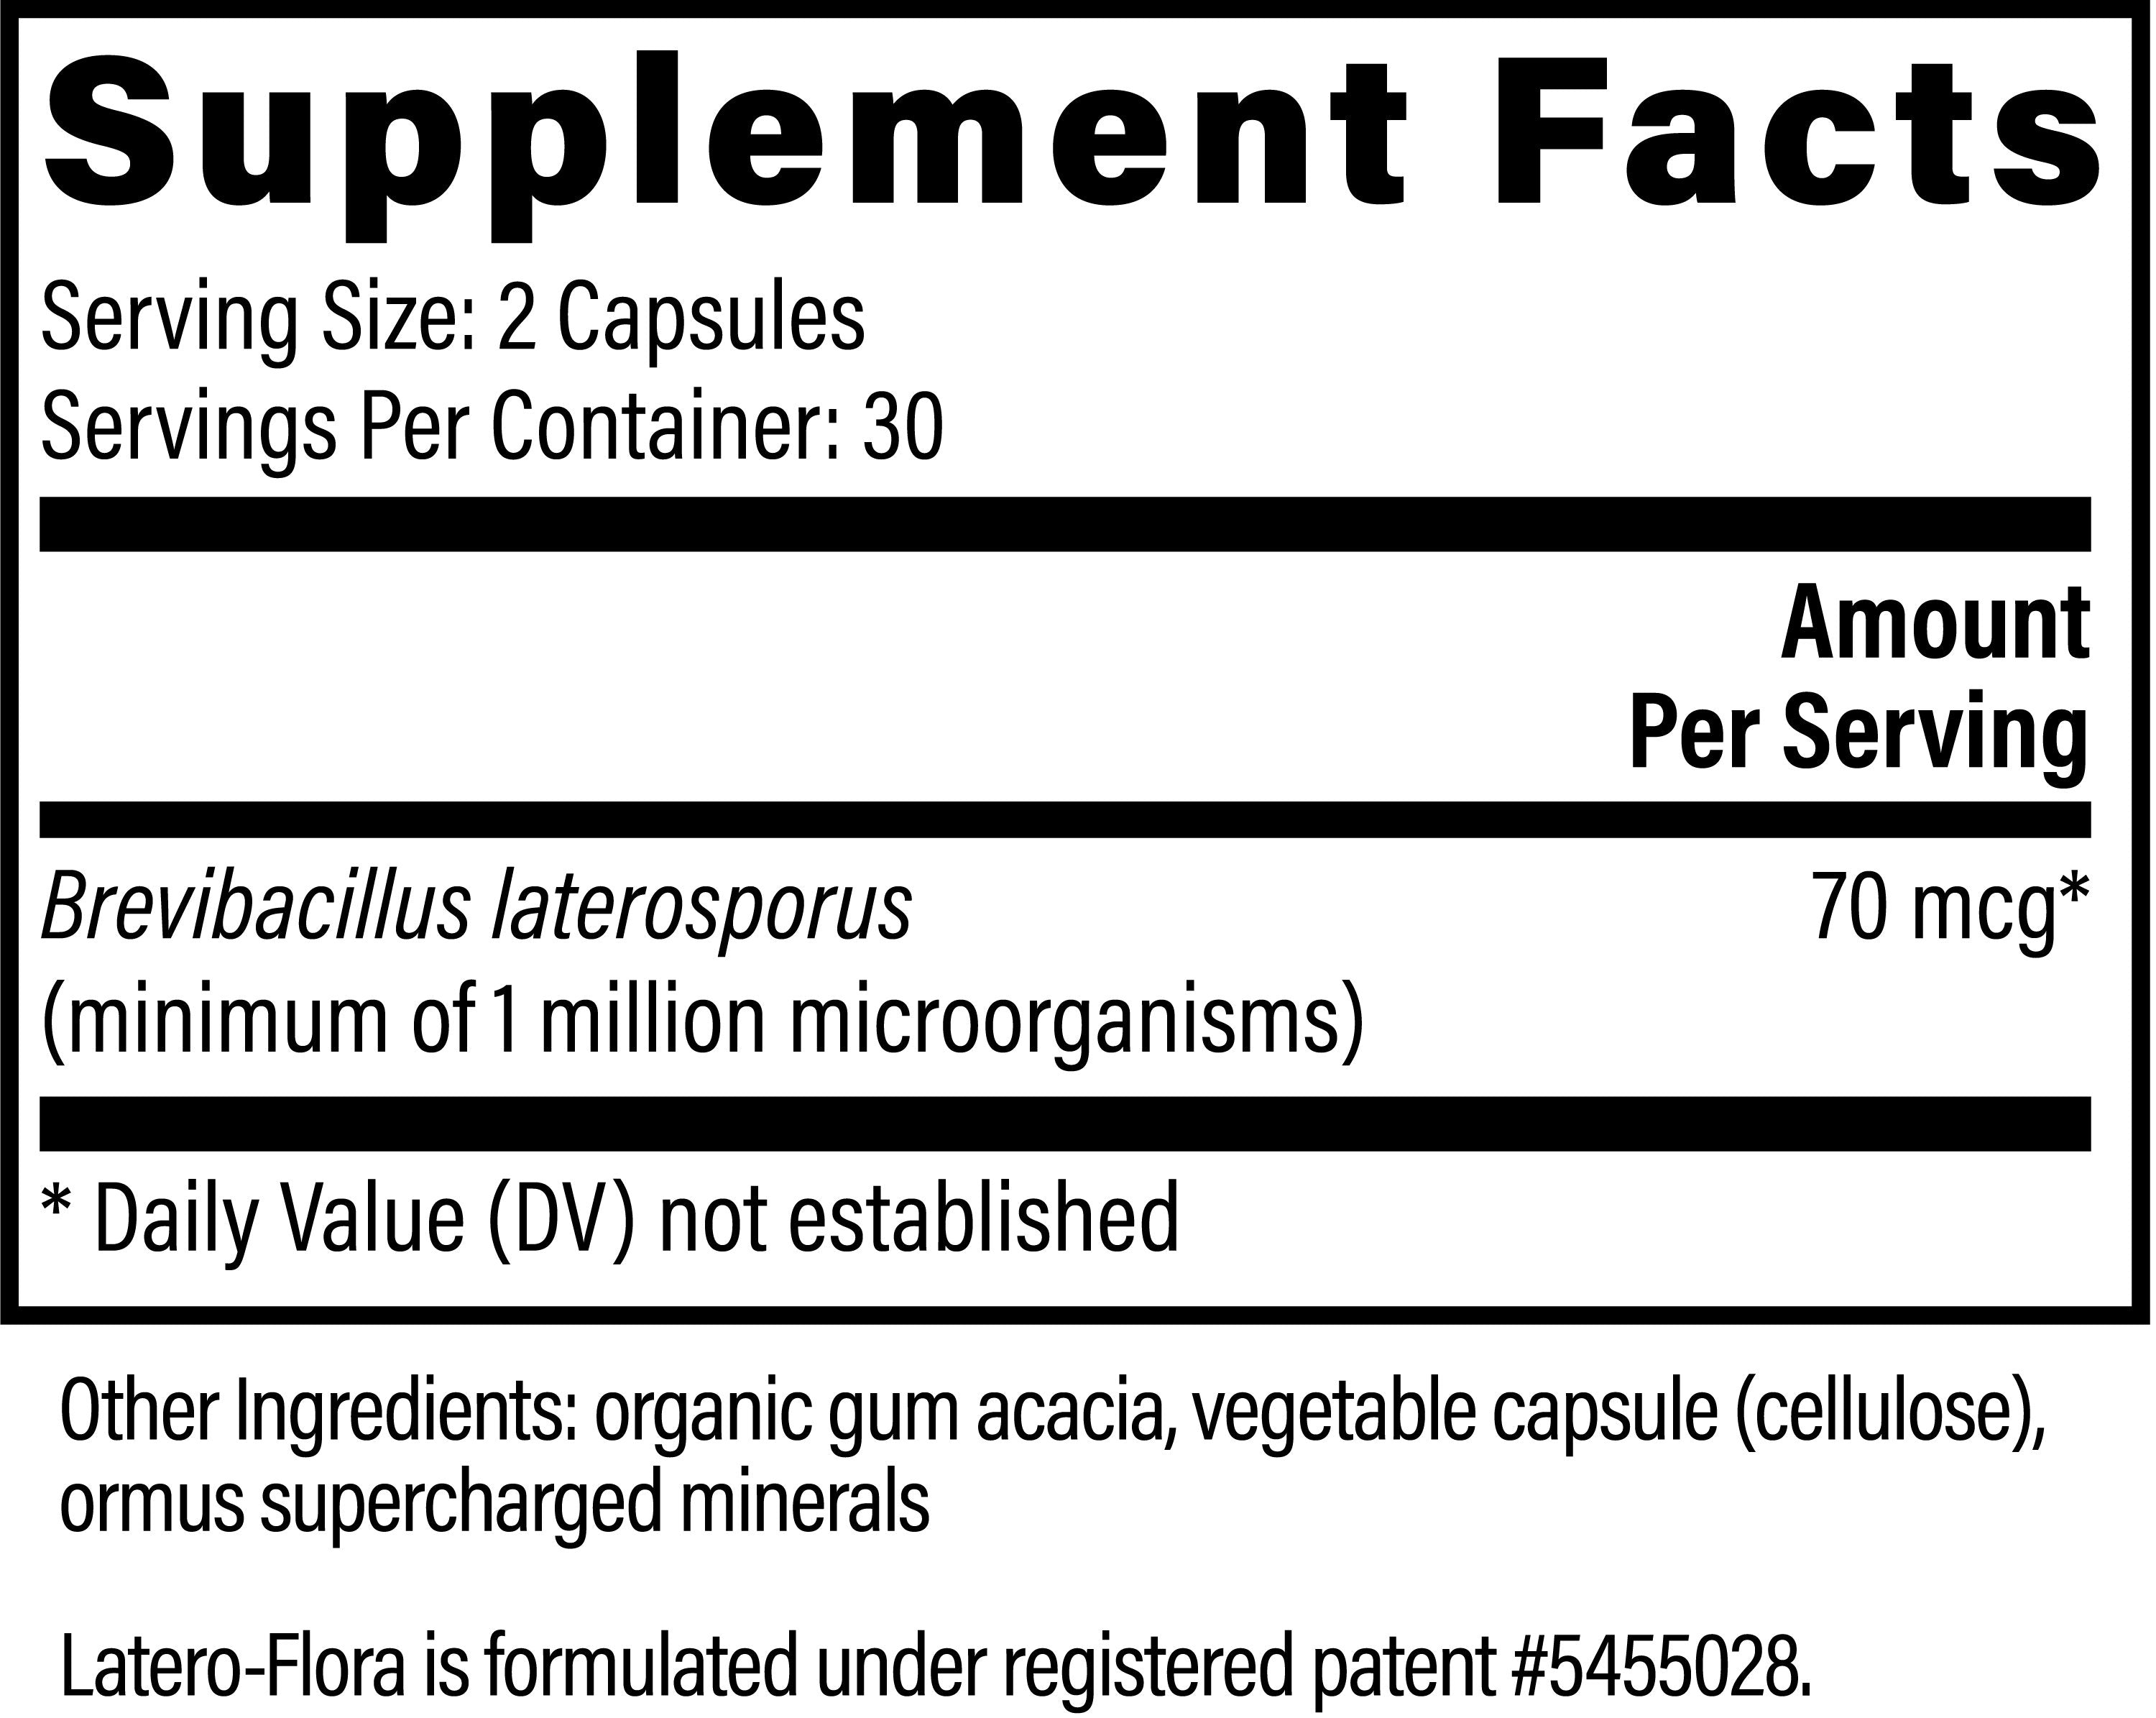 Global Healing's Latero-Flora - Supplement Facts for the Probiotic Supplement for Healthy Digestion.